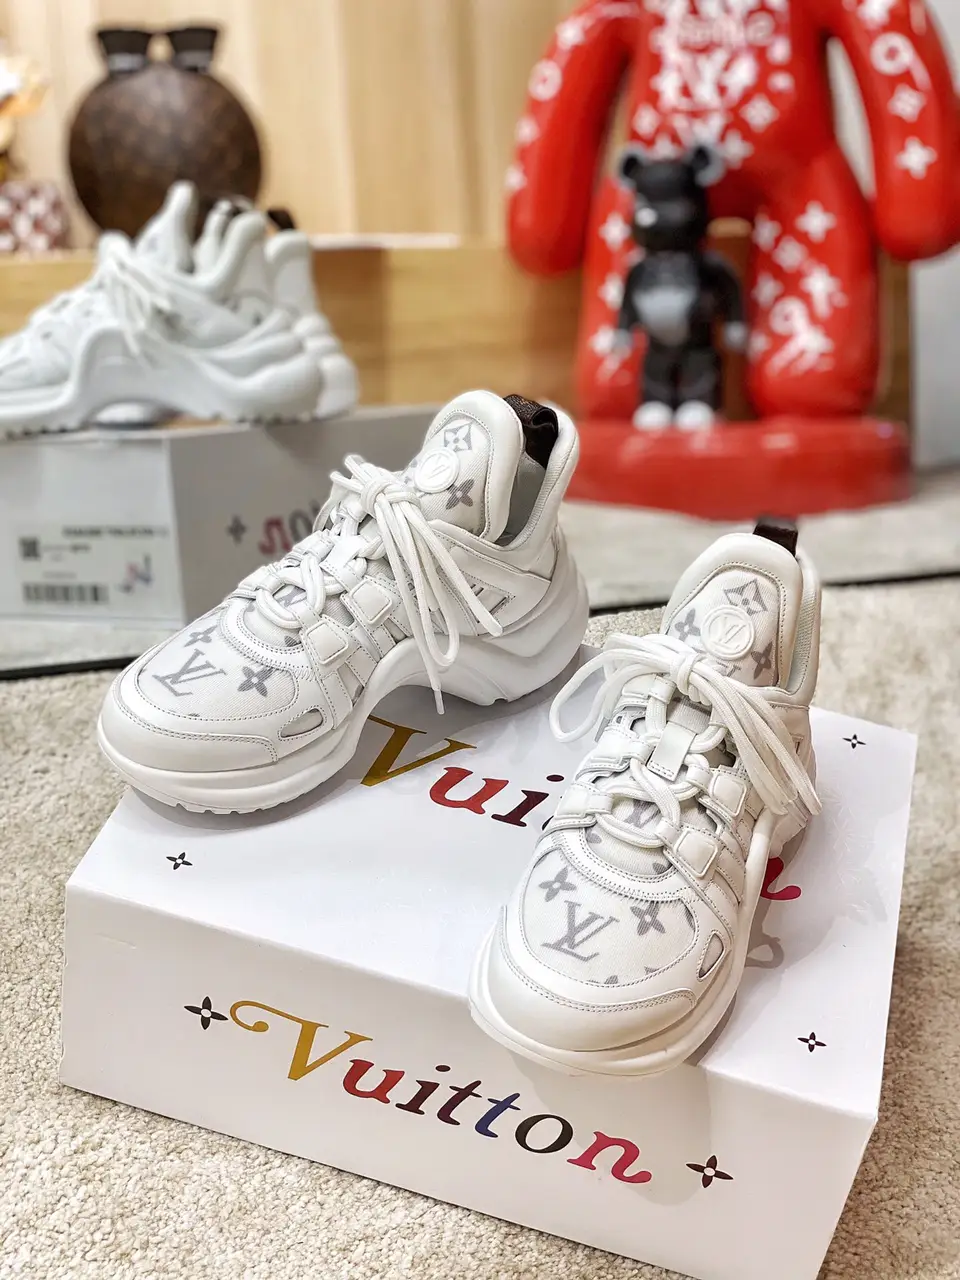 Louis Vuitton's Archlight Sneakers Are This Season's Must-Have Designer  Kicks